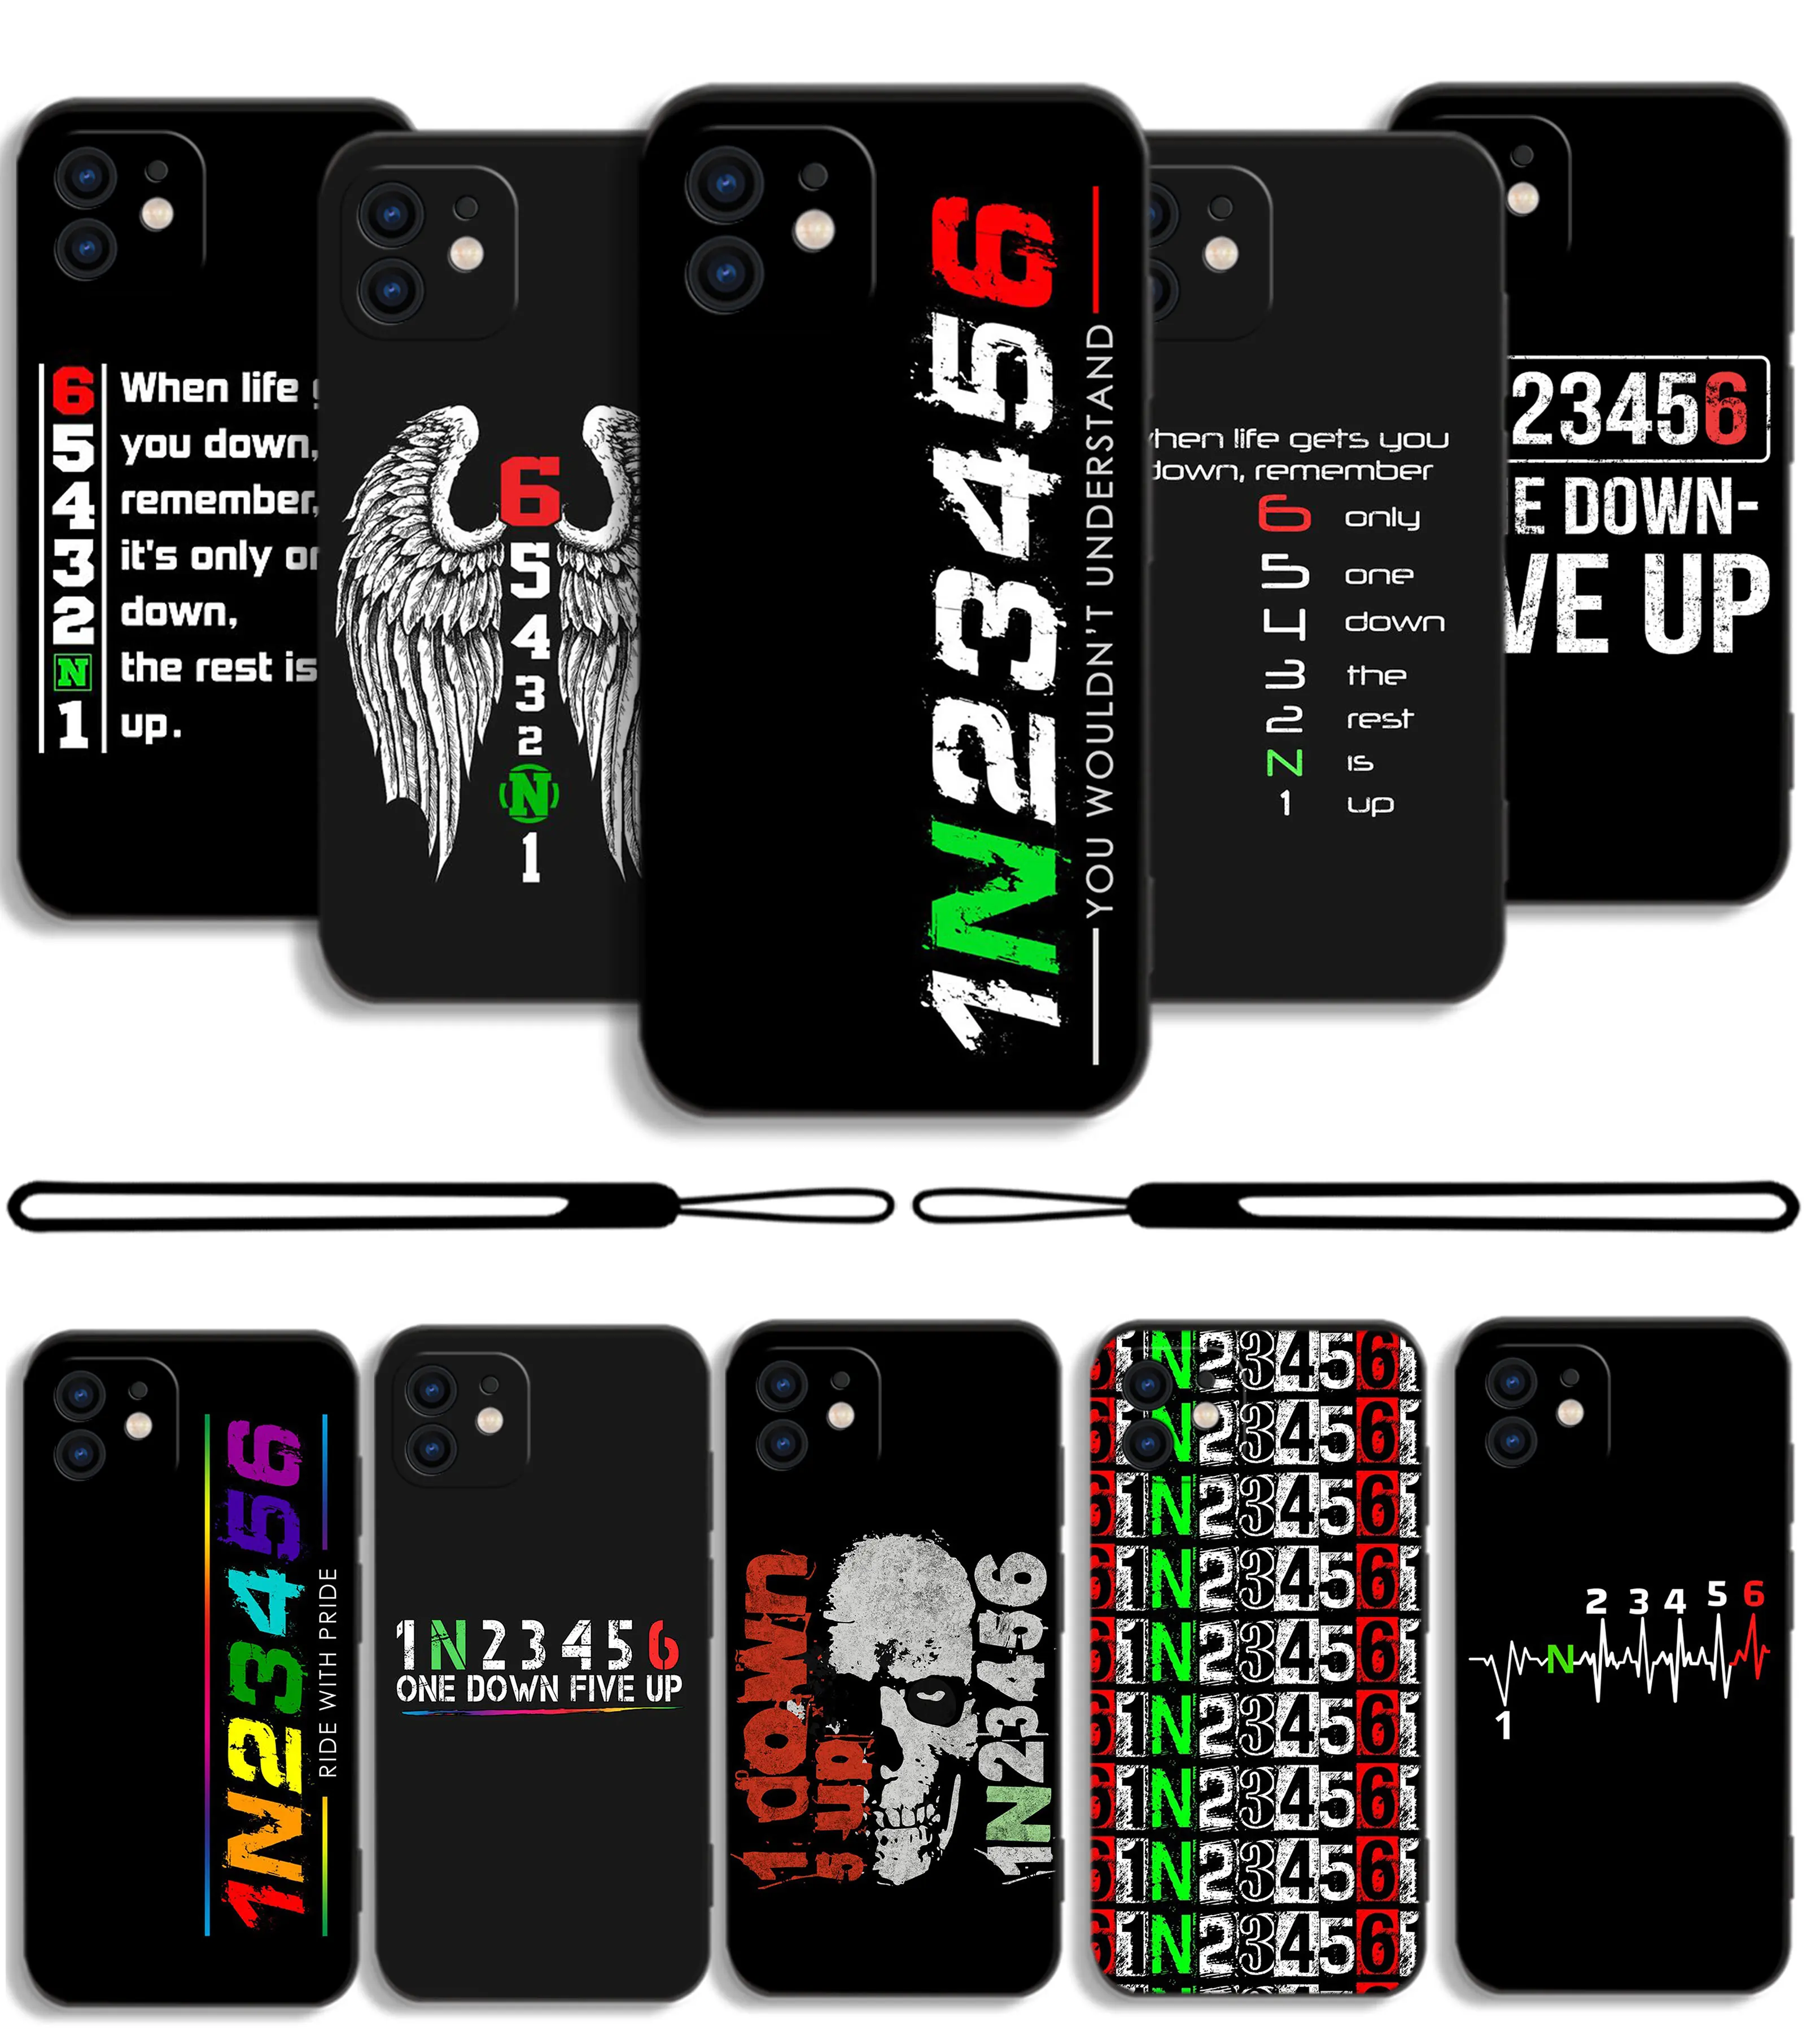 

Motorcycle 1N23456 Phone Case For Samsung Galaxy S23 S22 S21 S20 Ultra Plus FE S10 4G S9 S10E Note 20 10 Plus With Lanyard Cover